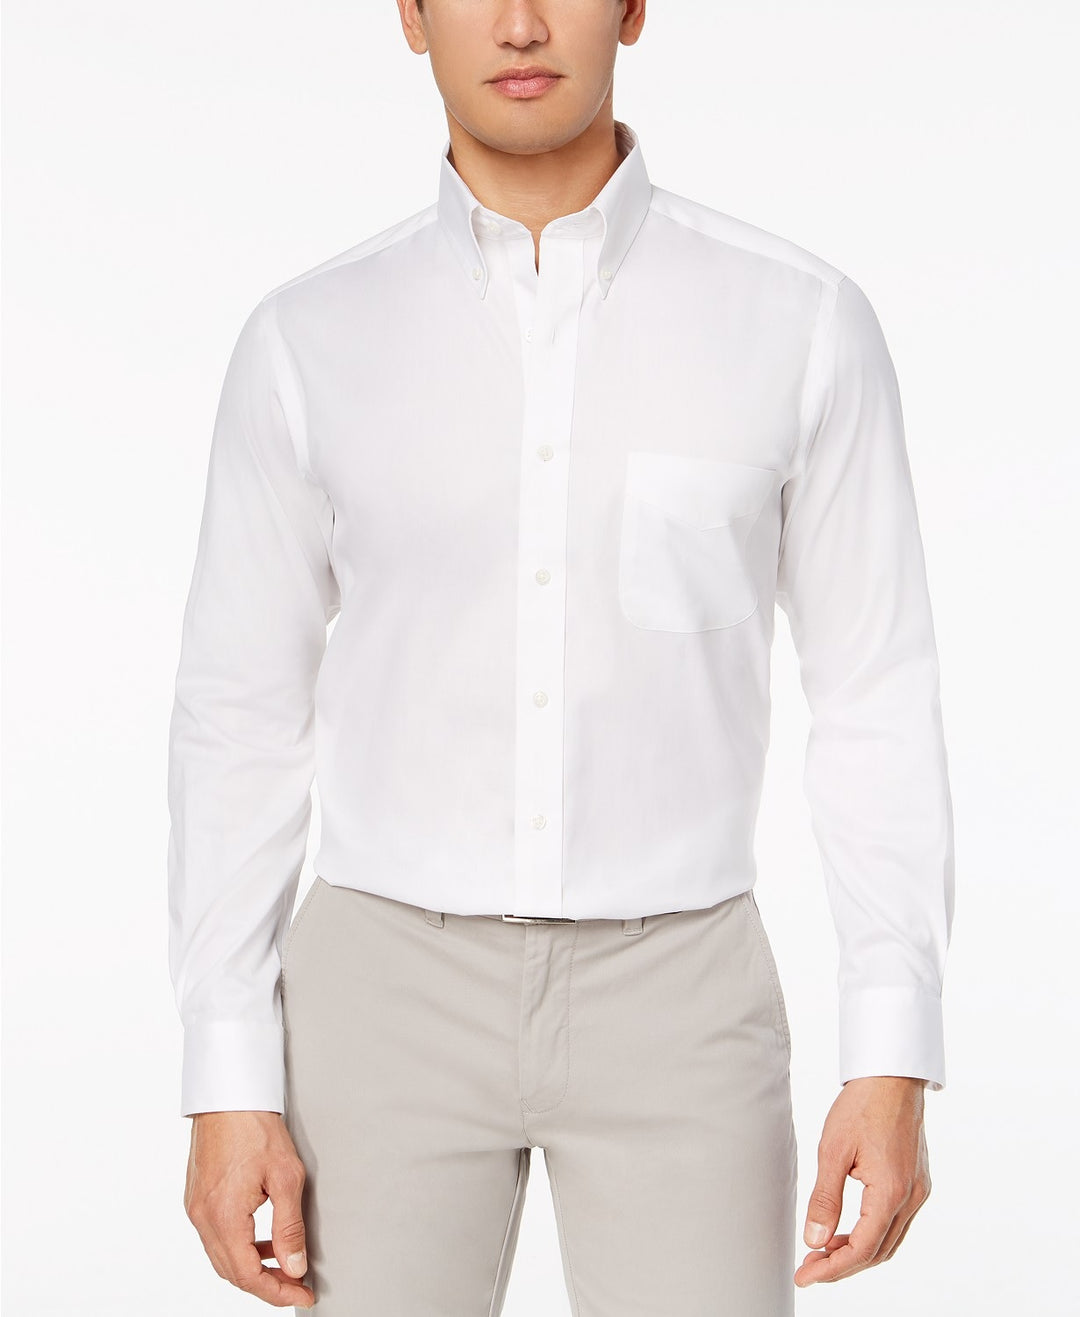 Club Room Men's Performance Wrinkle-Resistant Pinpoint Solid Dress Shirt white Size 18X34-35